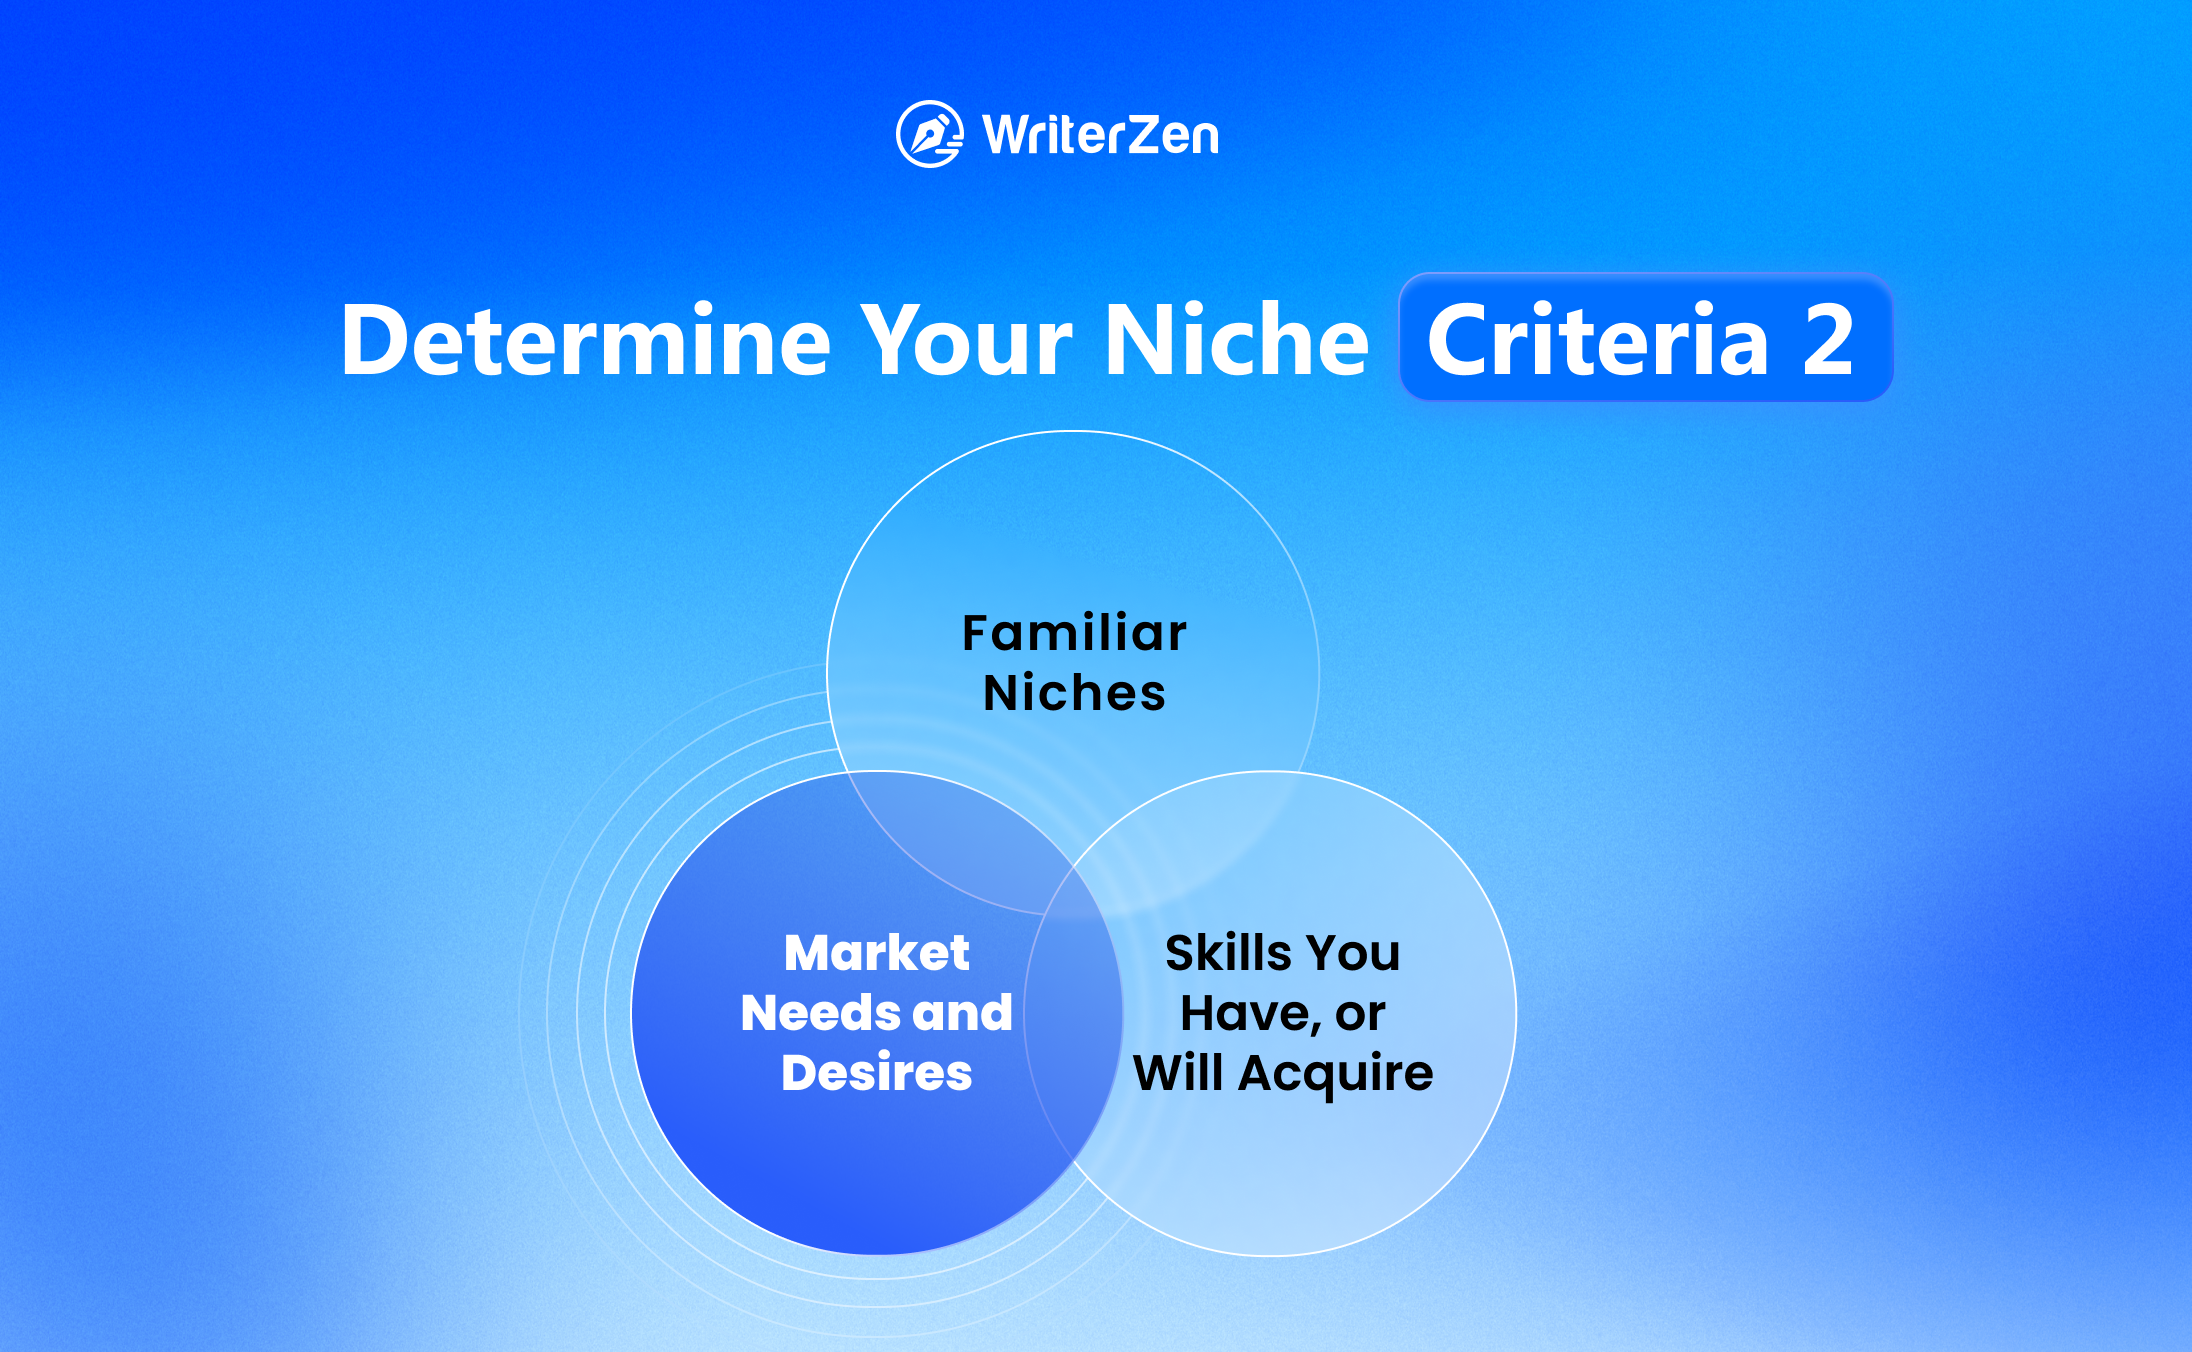 Determine Your Niche's Criteria Two: The Market's Needs And Desires